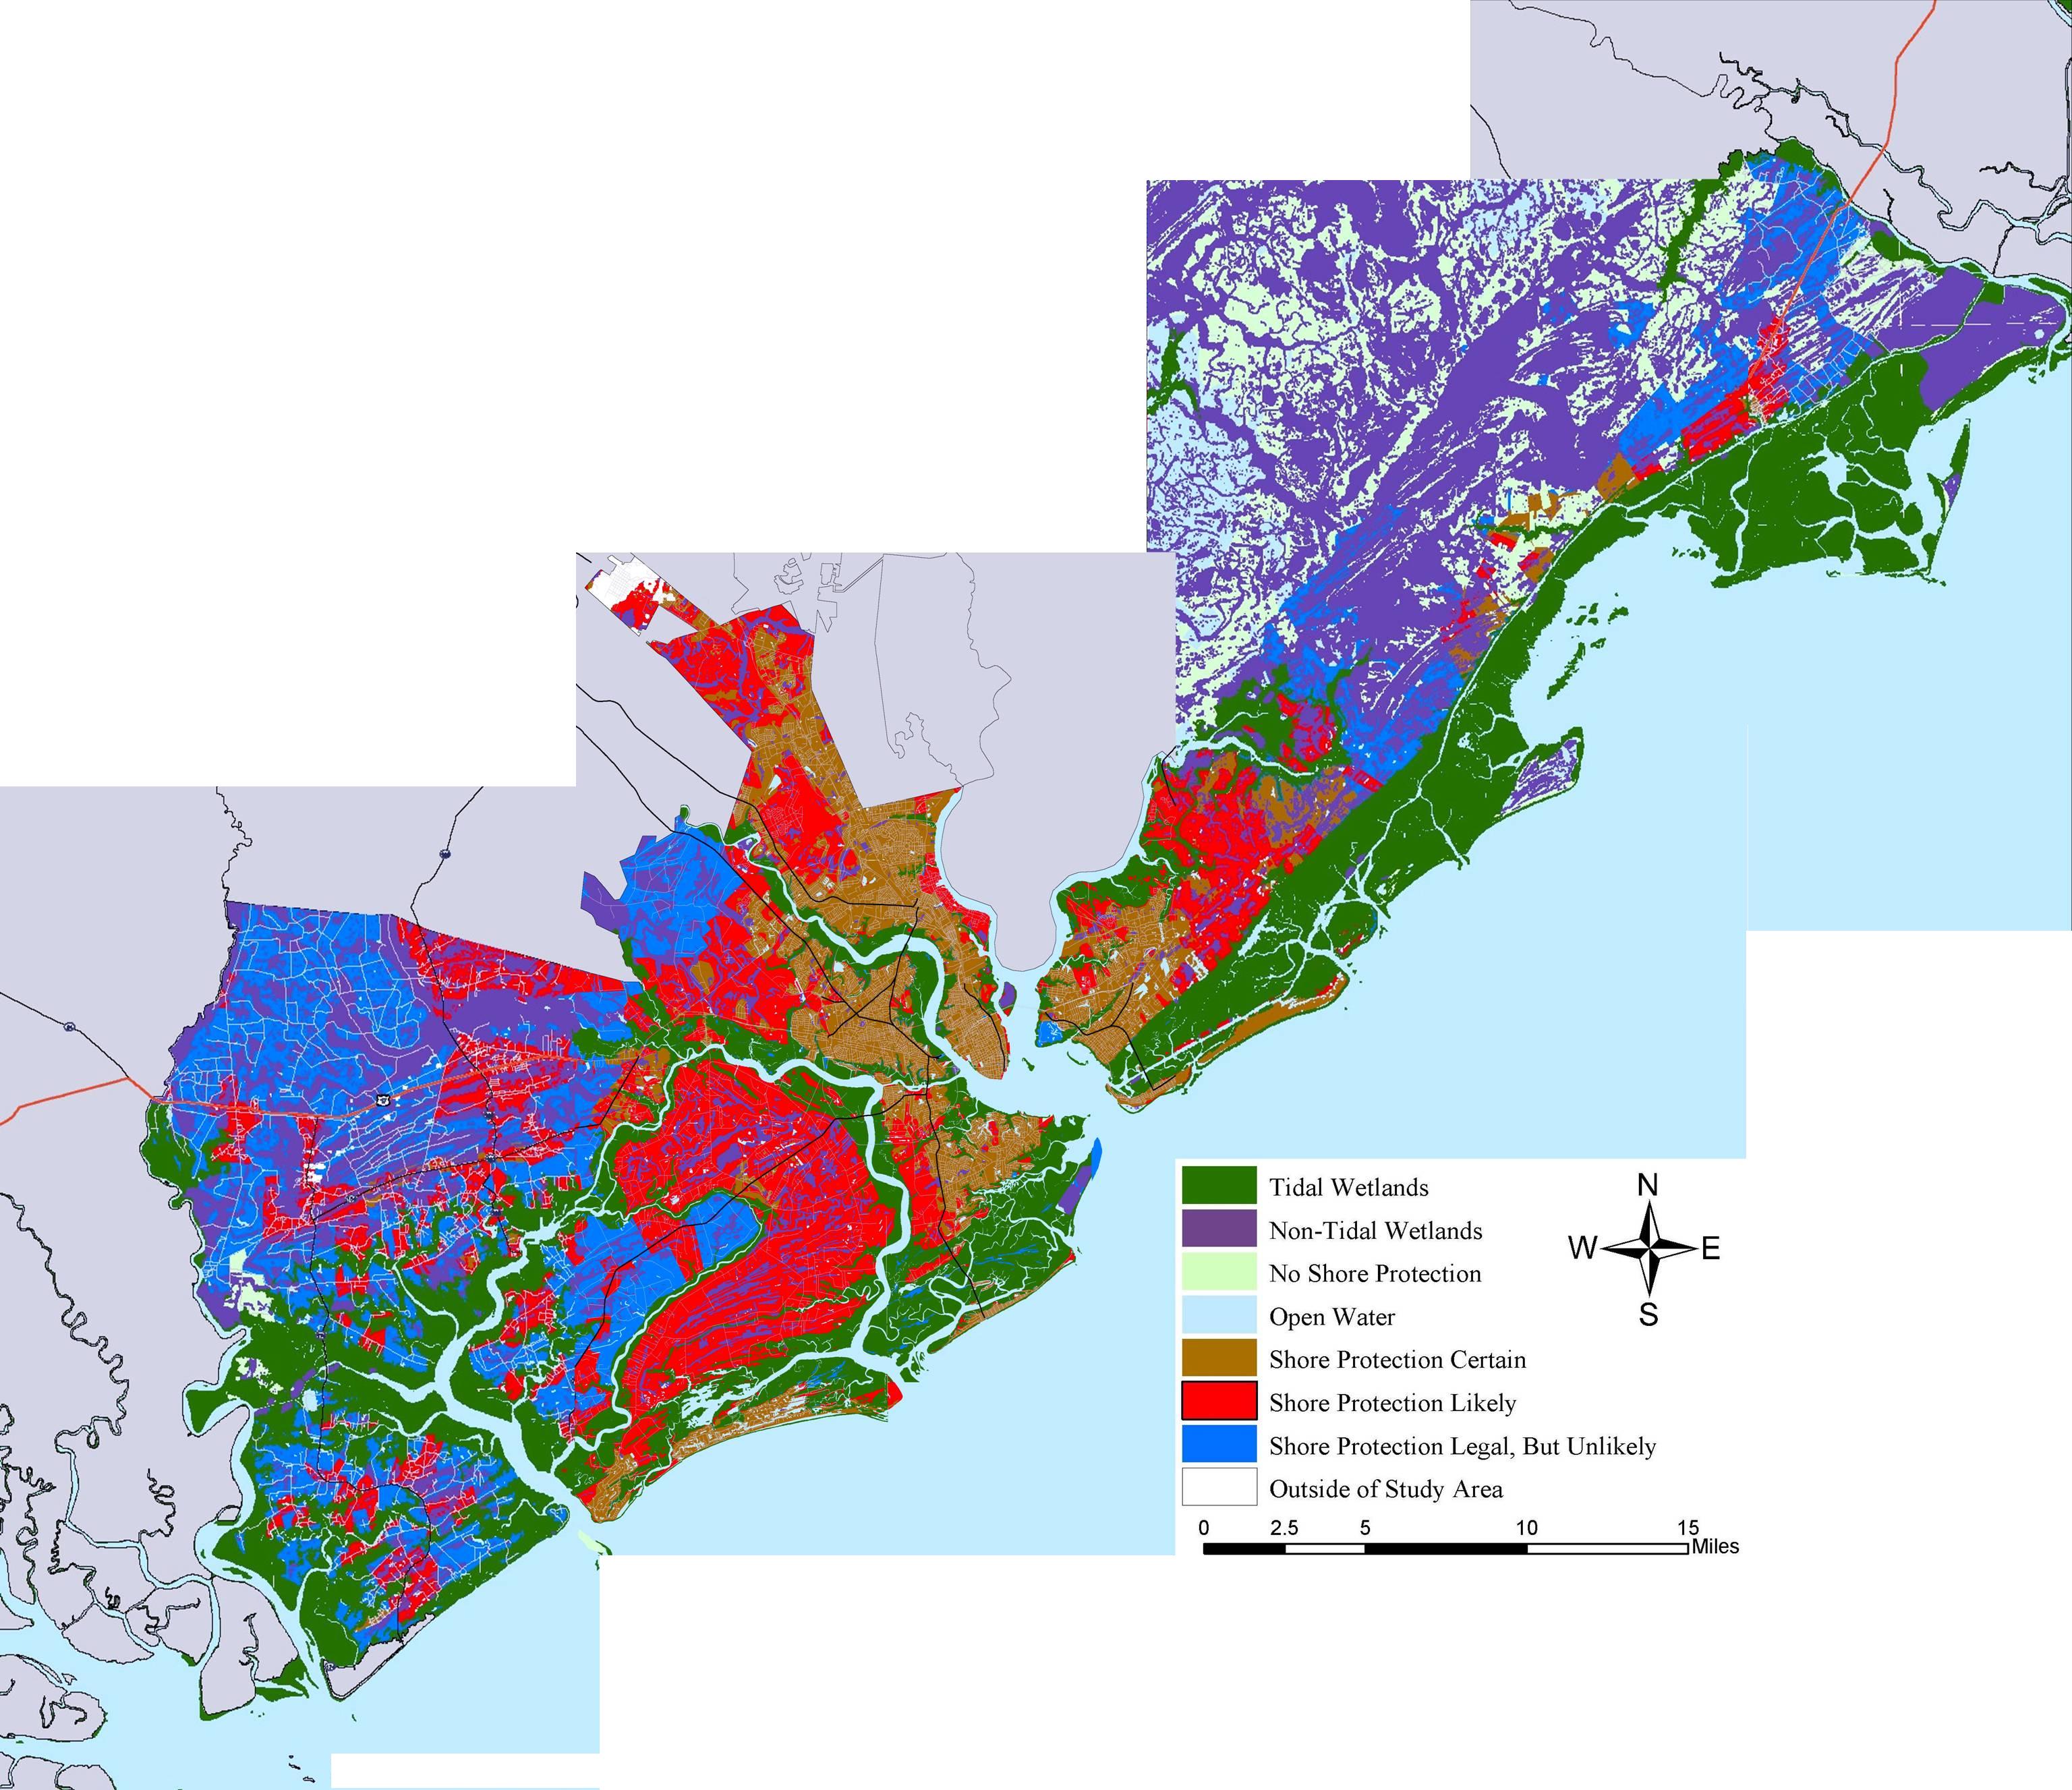 Sea Level Rise Planning Maps Likelihood Of Shore Protection In